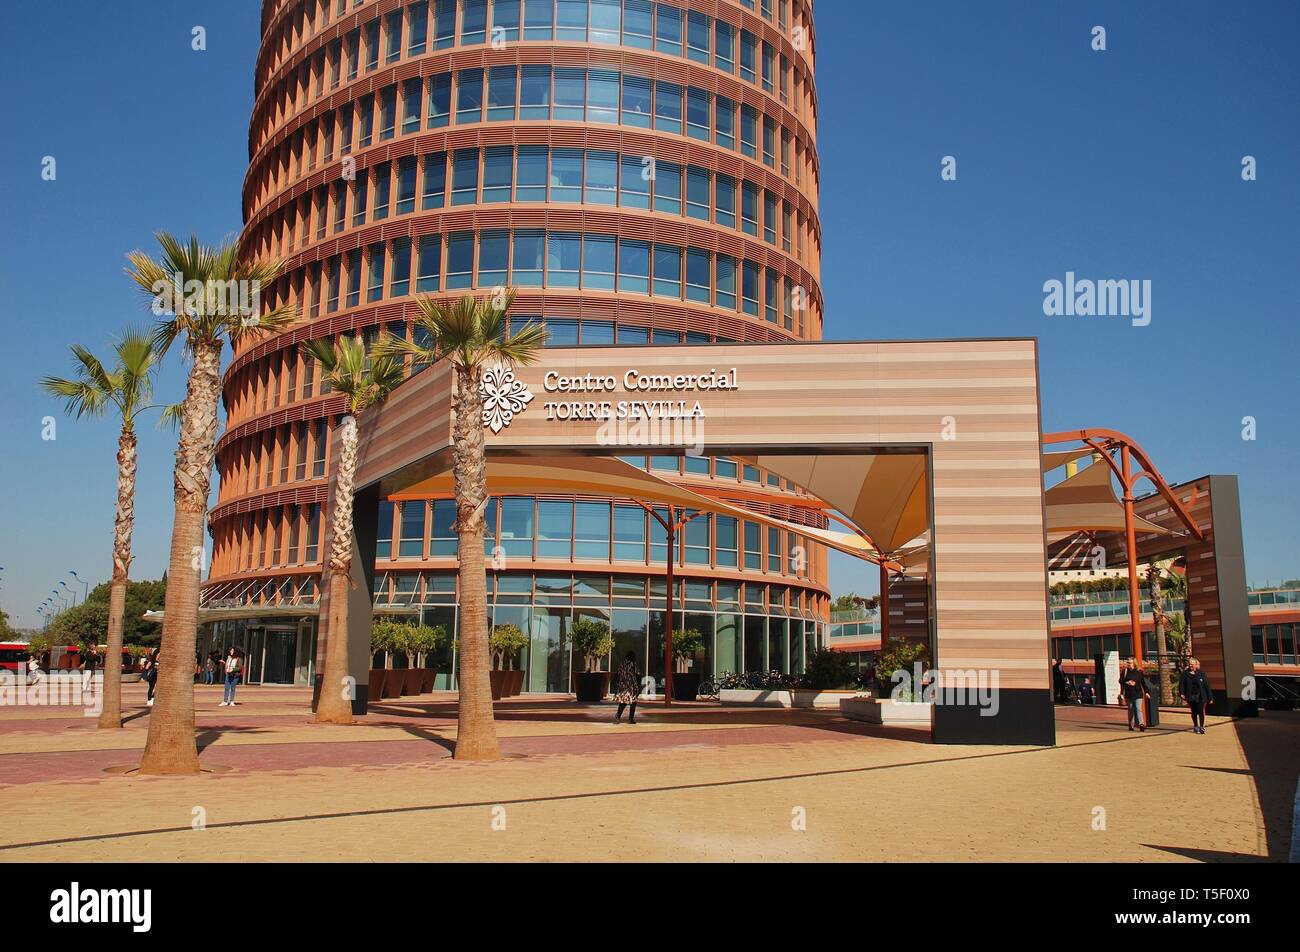 The Torre Sevilla office and hotel building in Seville, Spain on April 3, 2019. Completed in 2015, it is the tallest building in Seville. Stock Photo